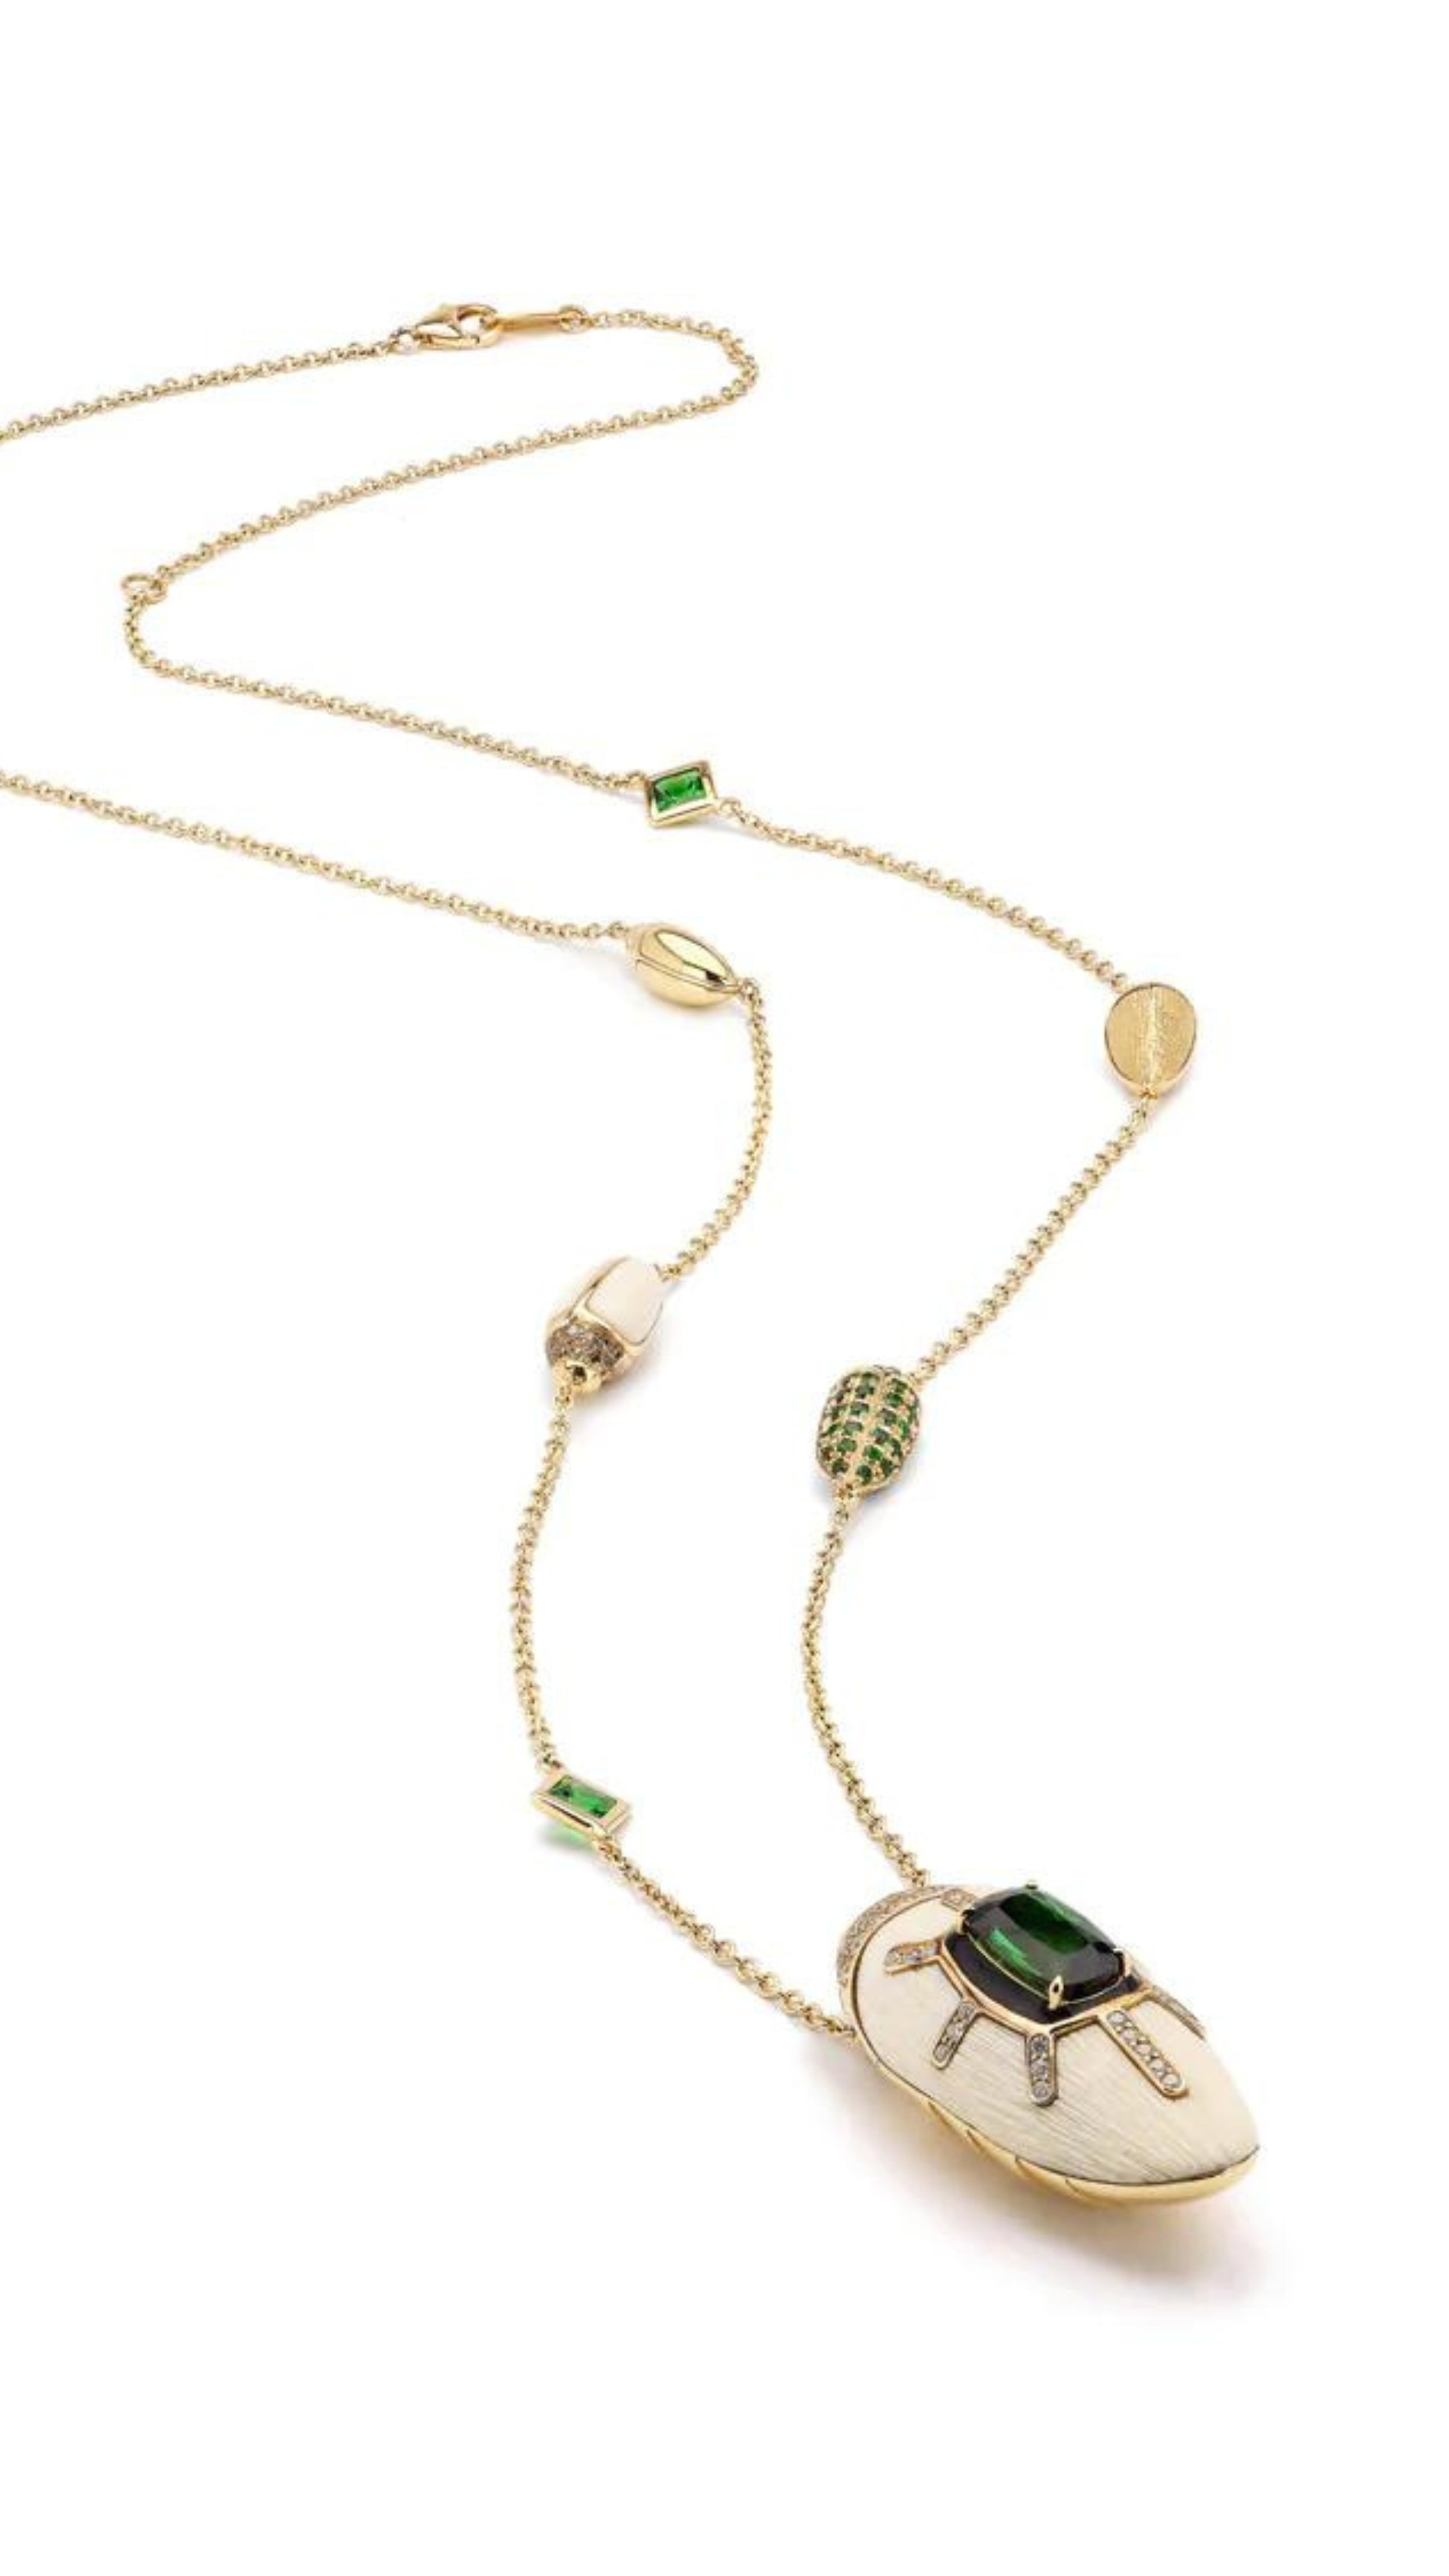 Bibi van der Velden Scarab Mammoth Necklace. Art deco style scarab pendant drop crafted from mammoth tusk and set with green tsavorite stones and pave white and brown diamonds. With links in the chain of scarabs and inset stones. Adjustable length necklace. Sustainable high jewelry. Photo showing the entire length of necklace from the side.